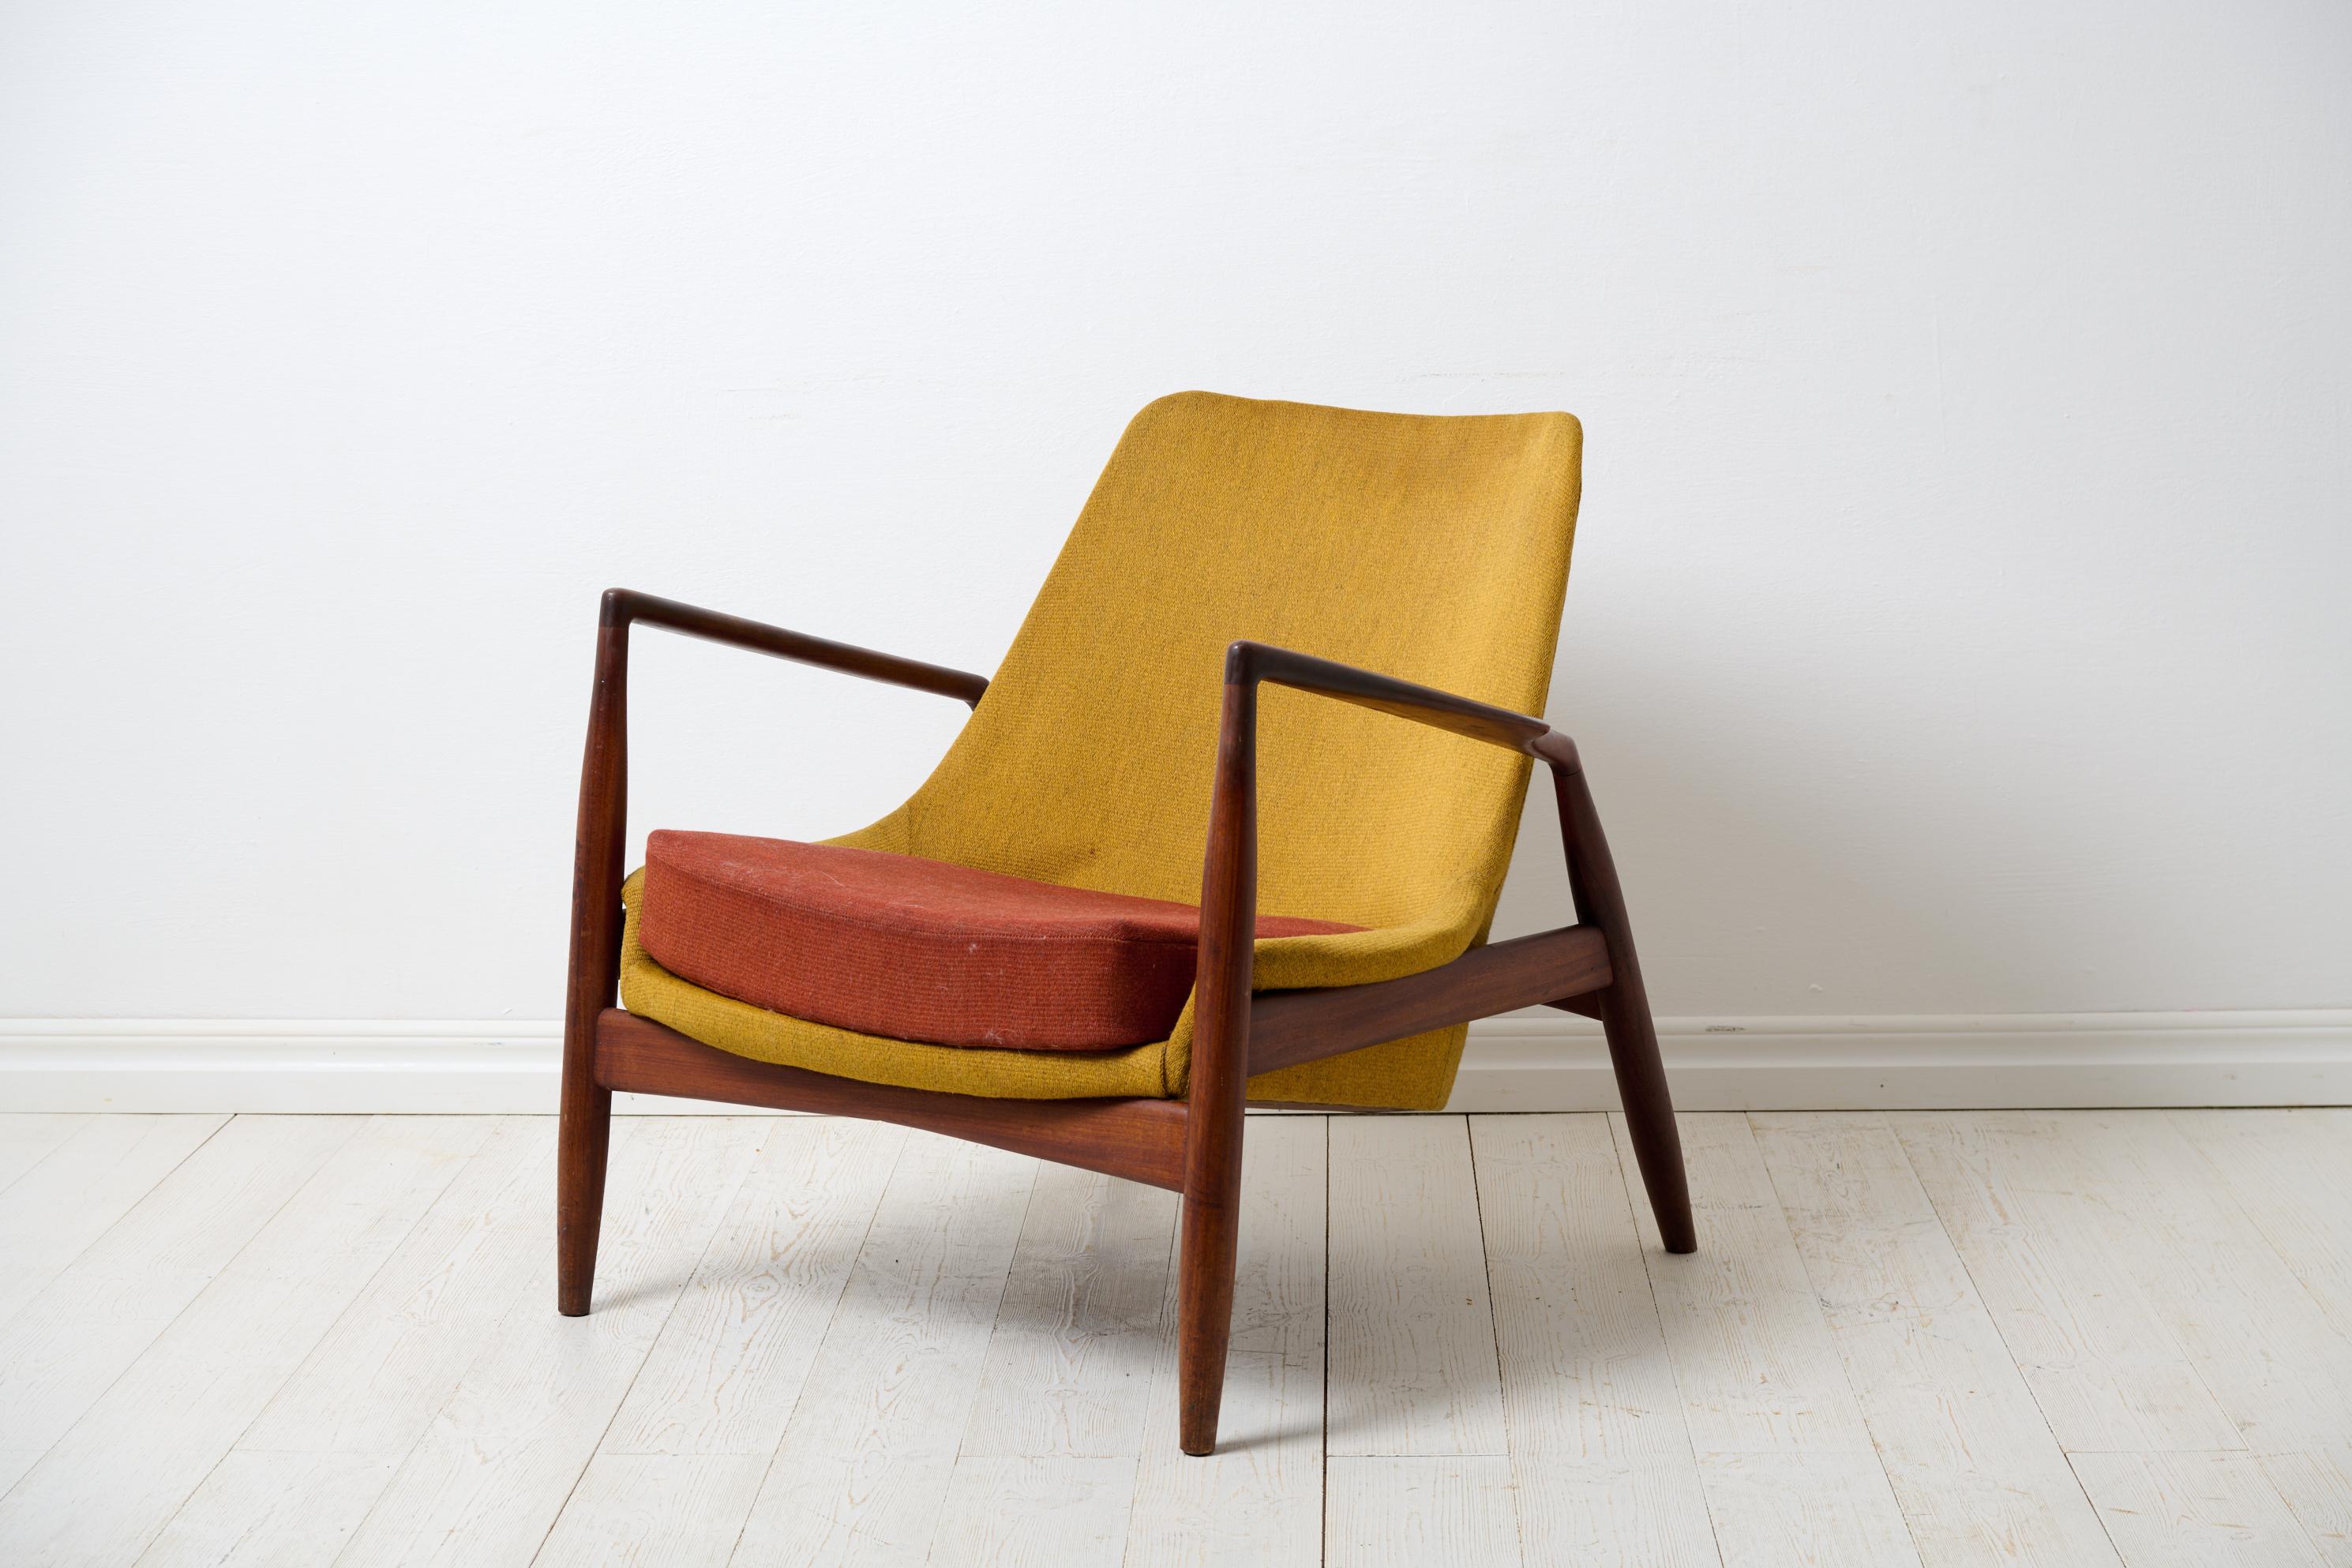 Scandinavian modern “Seal” armchair designed by Ib Kofod Larsen, Denmark. Made by OPE, Olof Persson Möbler, Jönköping Sweden. “Sälen”, as is the original name of the chair, is from the 1950s to 1960s, designed in 1956 and marked underneath the seat